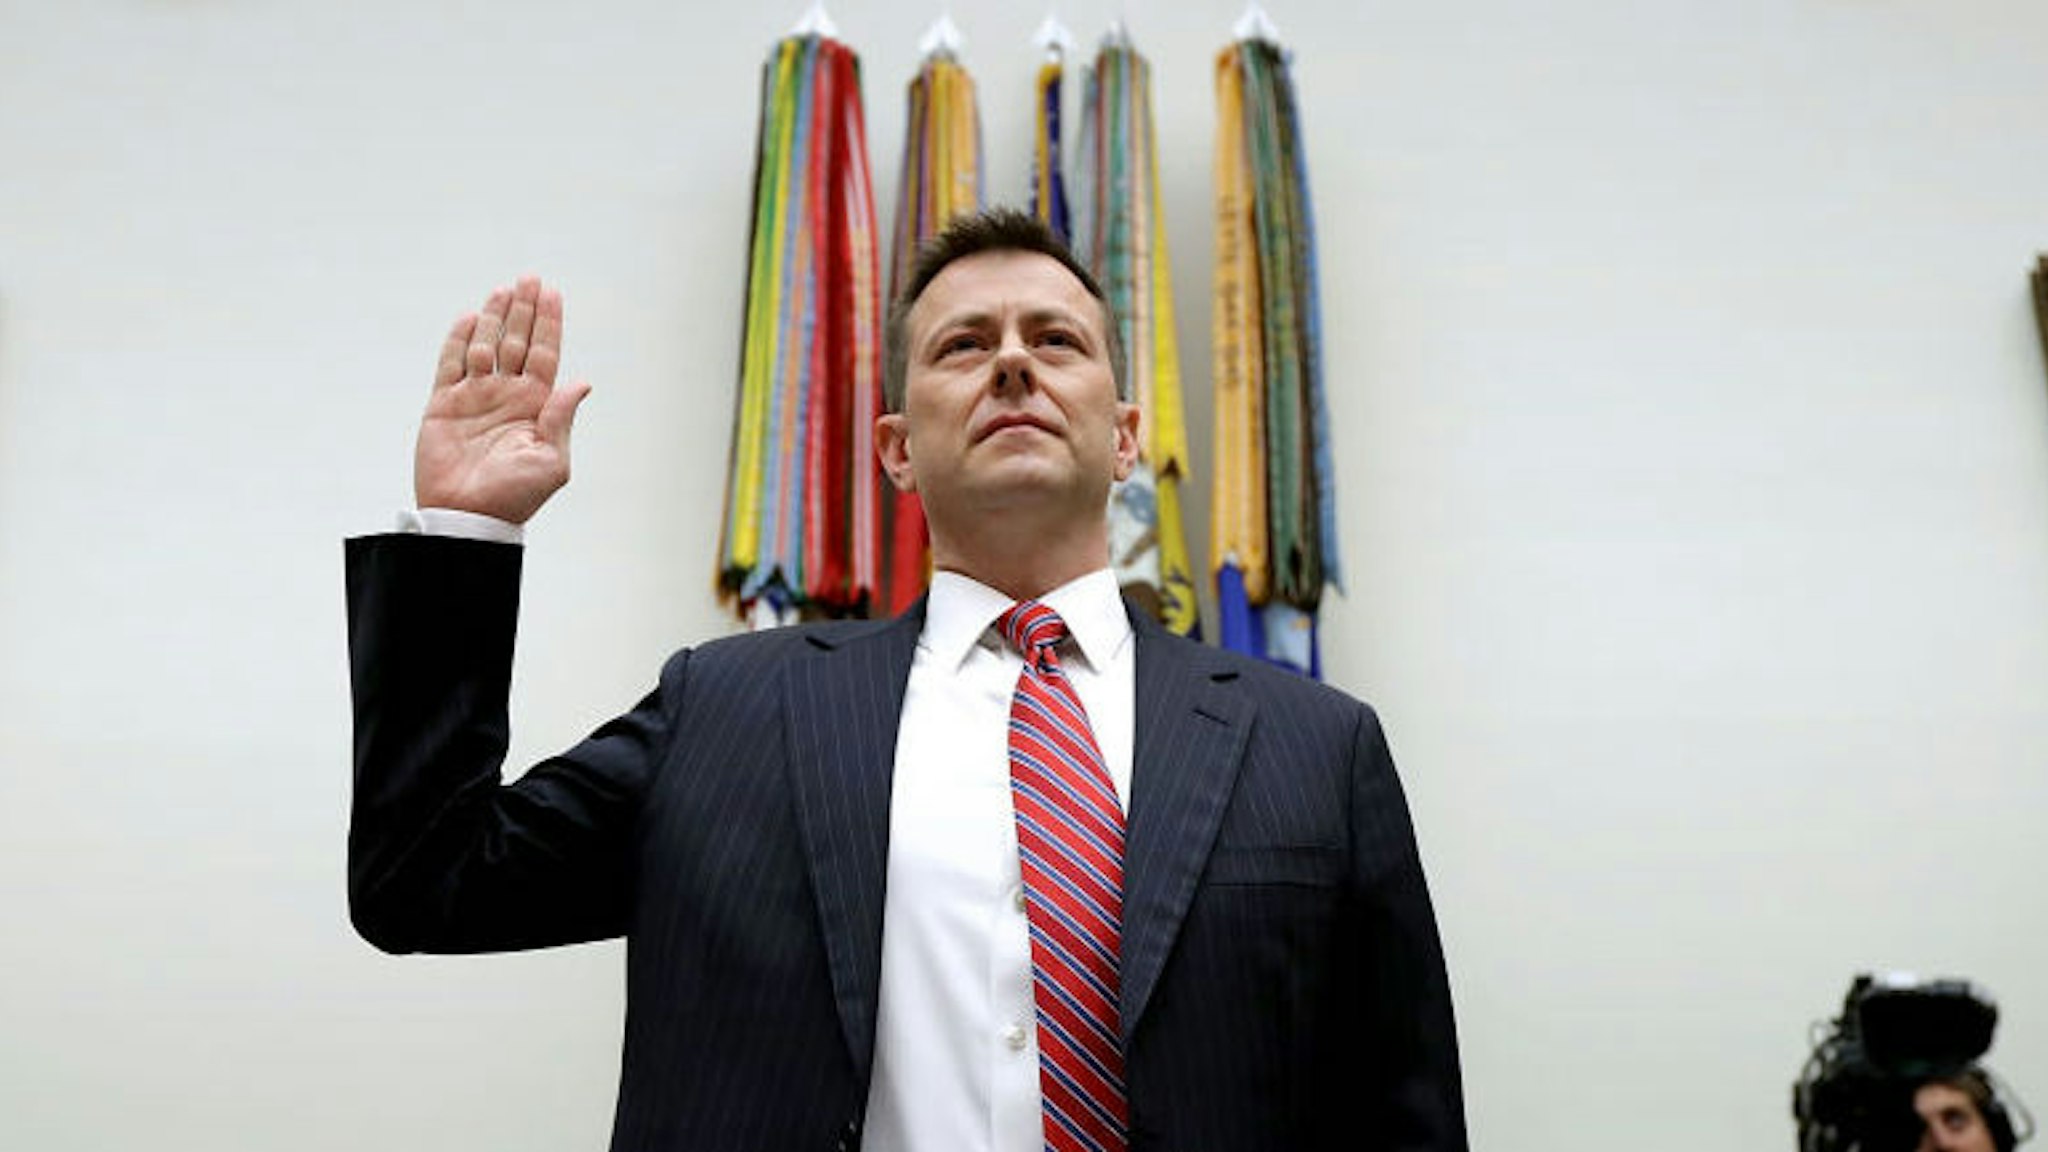 Deputy Assistant FBI Director Peter Strzok is sworn in before a joint committee hearing of the House Judiciary and Oversight and Government Reform committees in the Rayburn House Office Building on Capitol Hill July 12, 2018 in Washington, DC. While involved in the probe into Hillary ClintonÕs use of a private email server in 2016, Strzok exchanged text messages with FBI attorney Lisa Page that were critical of Trump. After learning about the messages, Mueller removed Strzok from his investigation into whether the Trump campaign colluded with Russia to win the 2016 presidential election. (Photo by Chip Somodevilla/Getty Images)